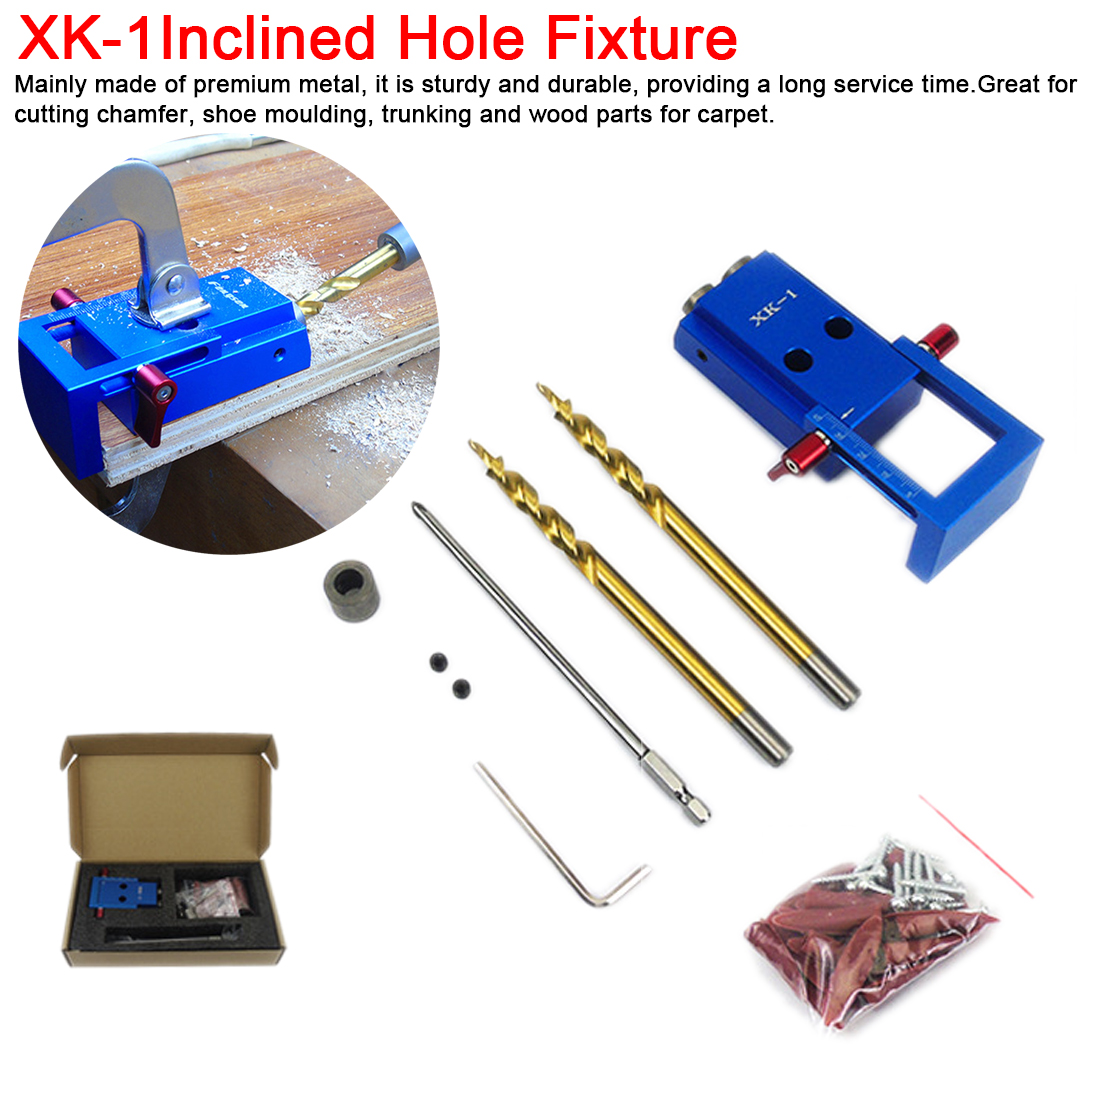 57x Woodworking Pocket Hole Screw Jig Kit Guide Drill Angle Locator Hole Puncher